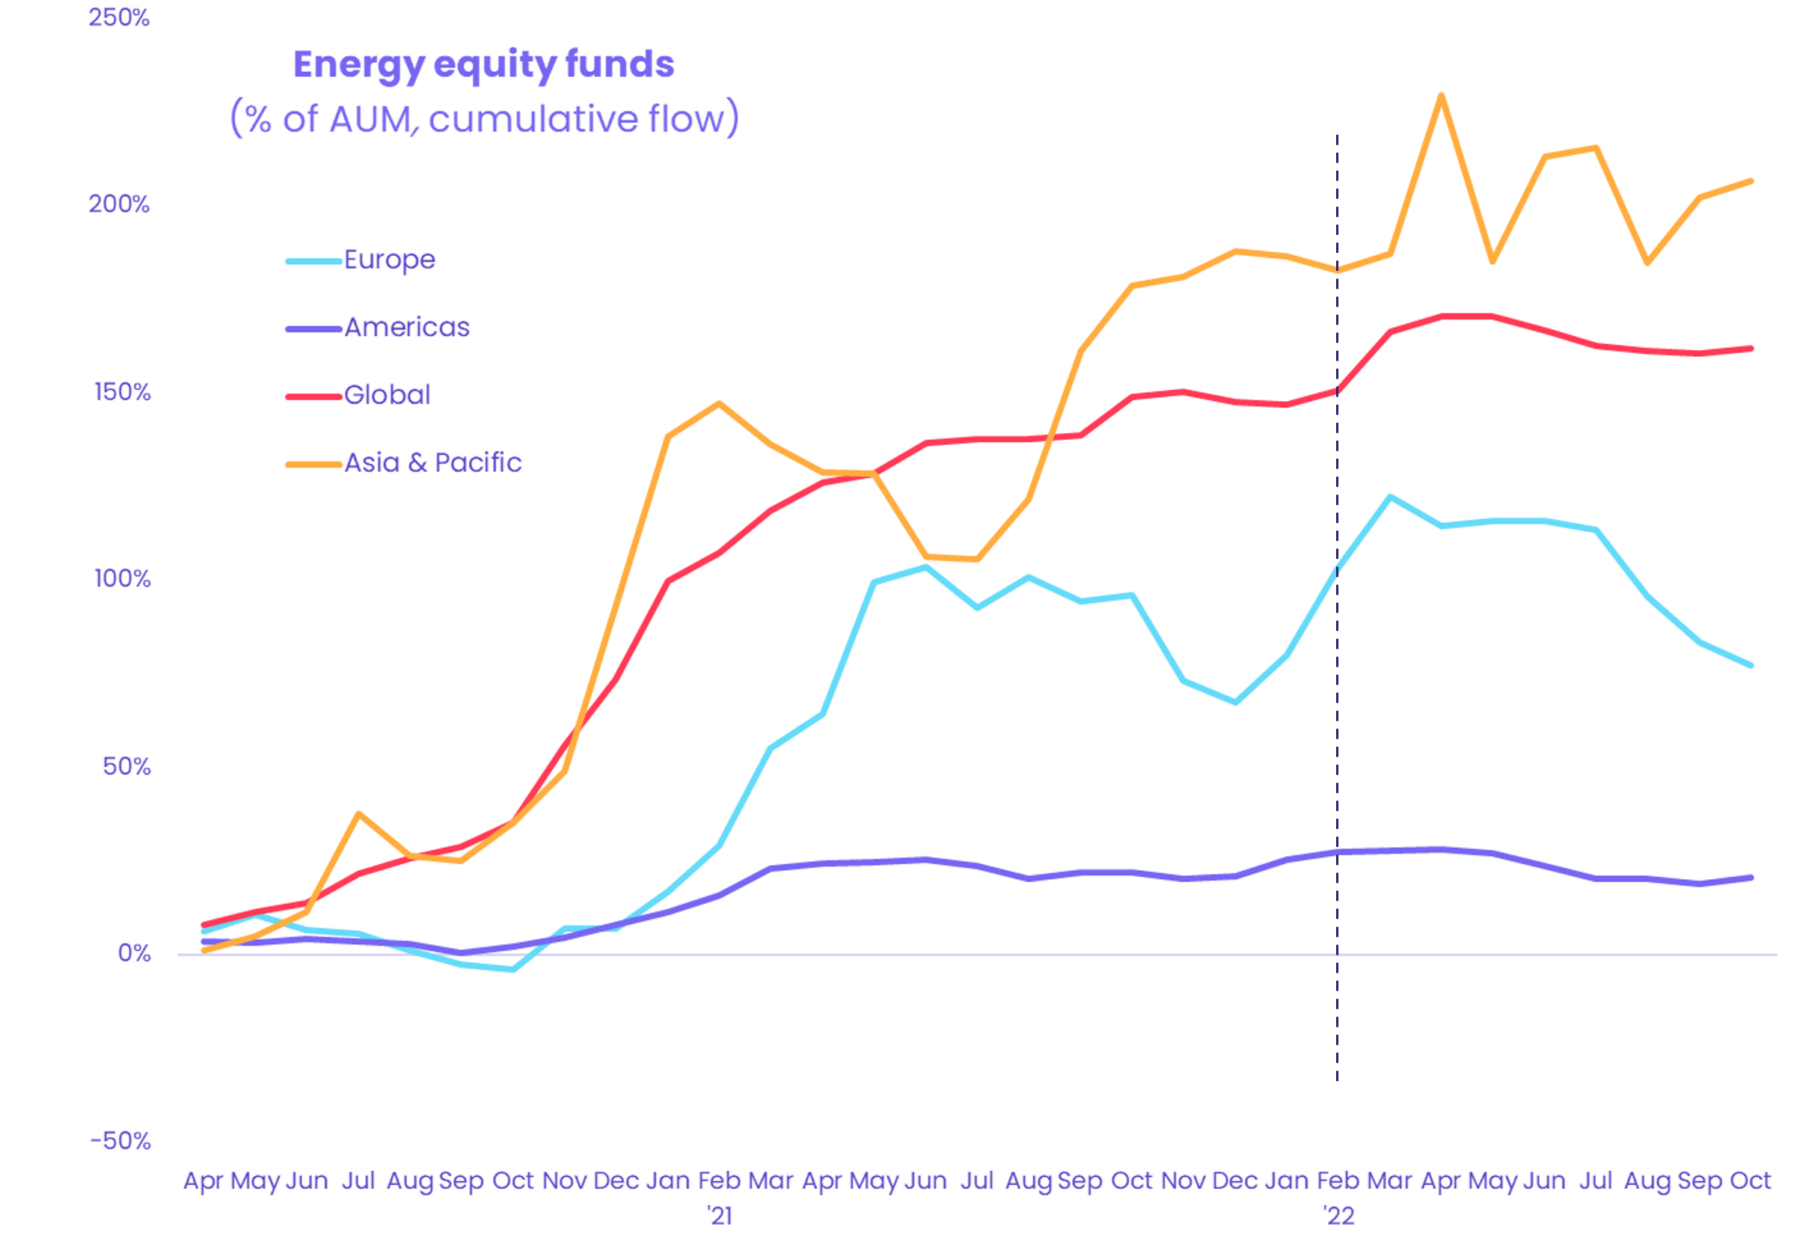 Chart representing 'Energy equity funds, as percentage of Assets under management, cumulative flow, for Europe, Americas, Global and Asia & Pacific.'